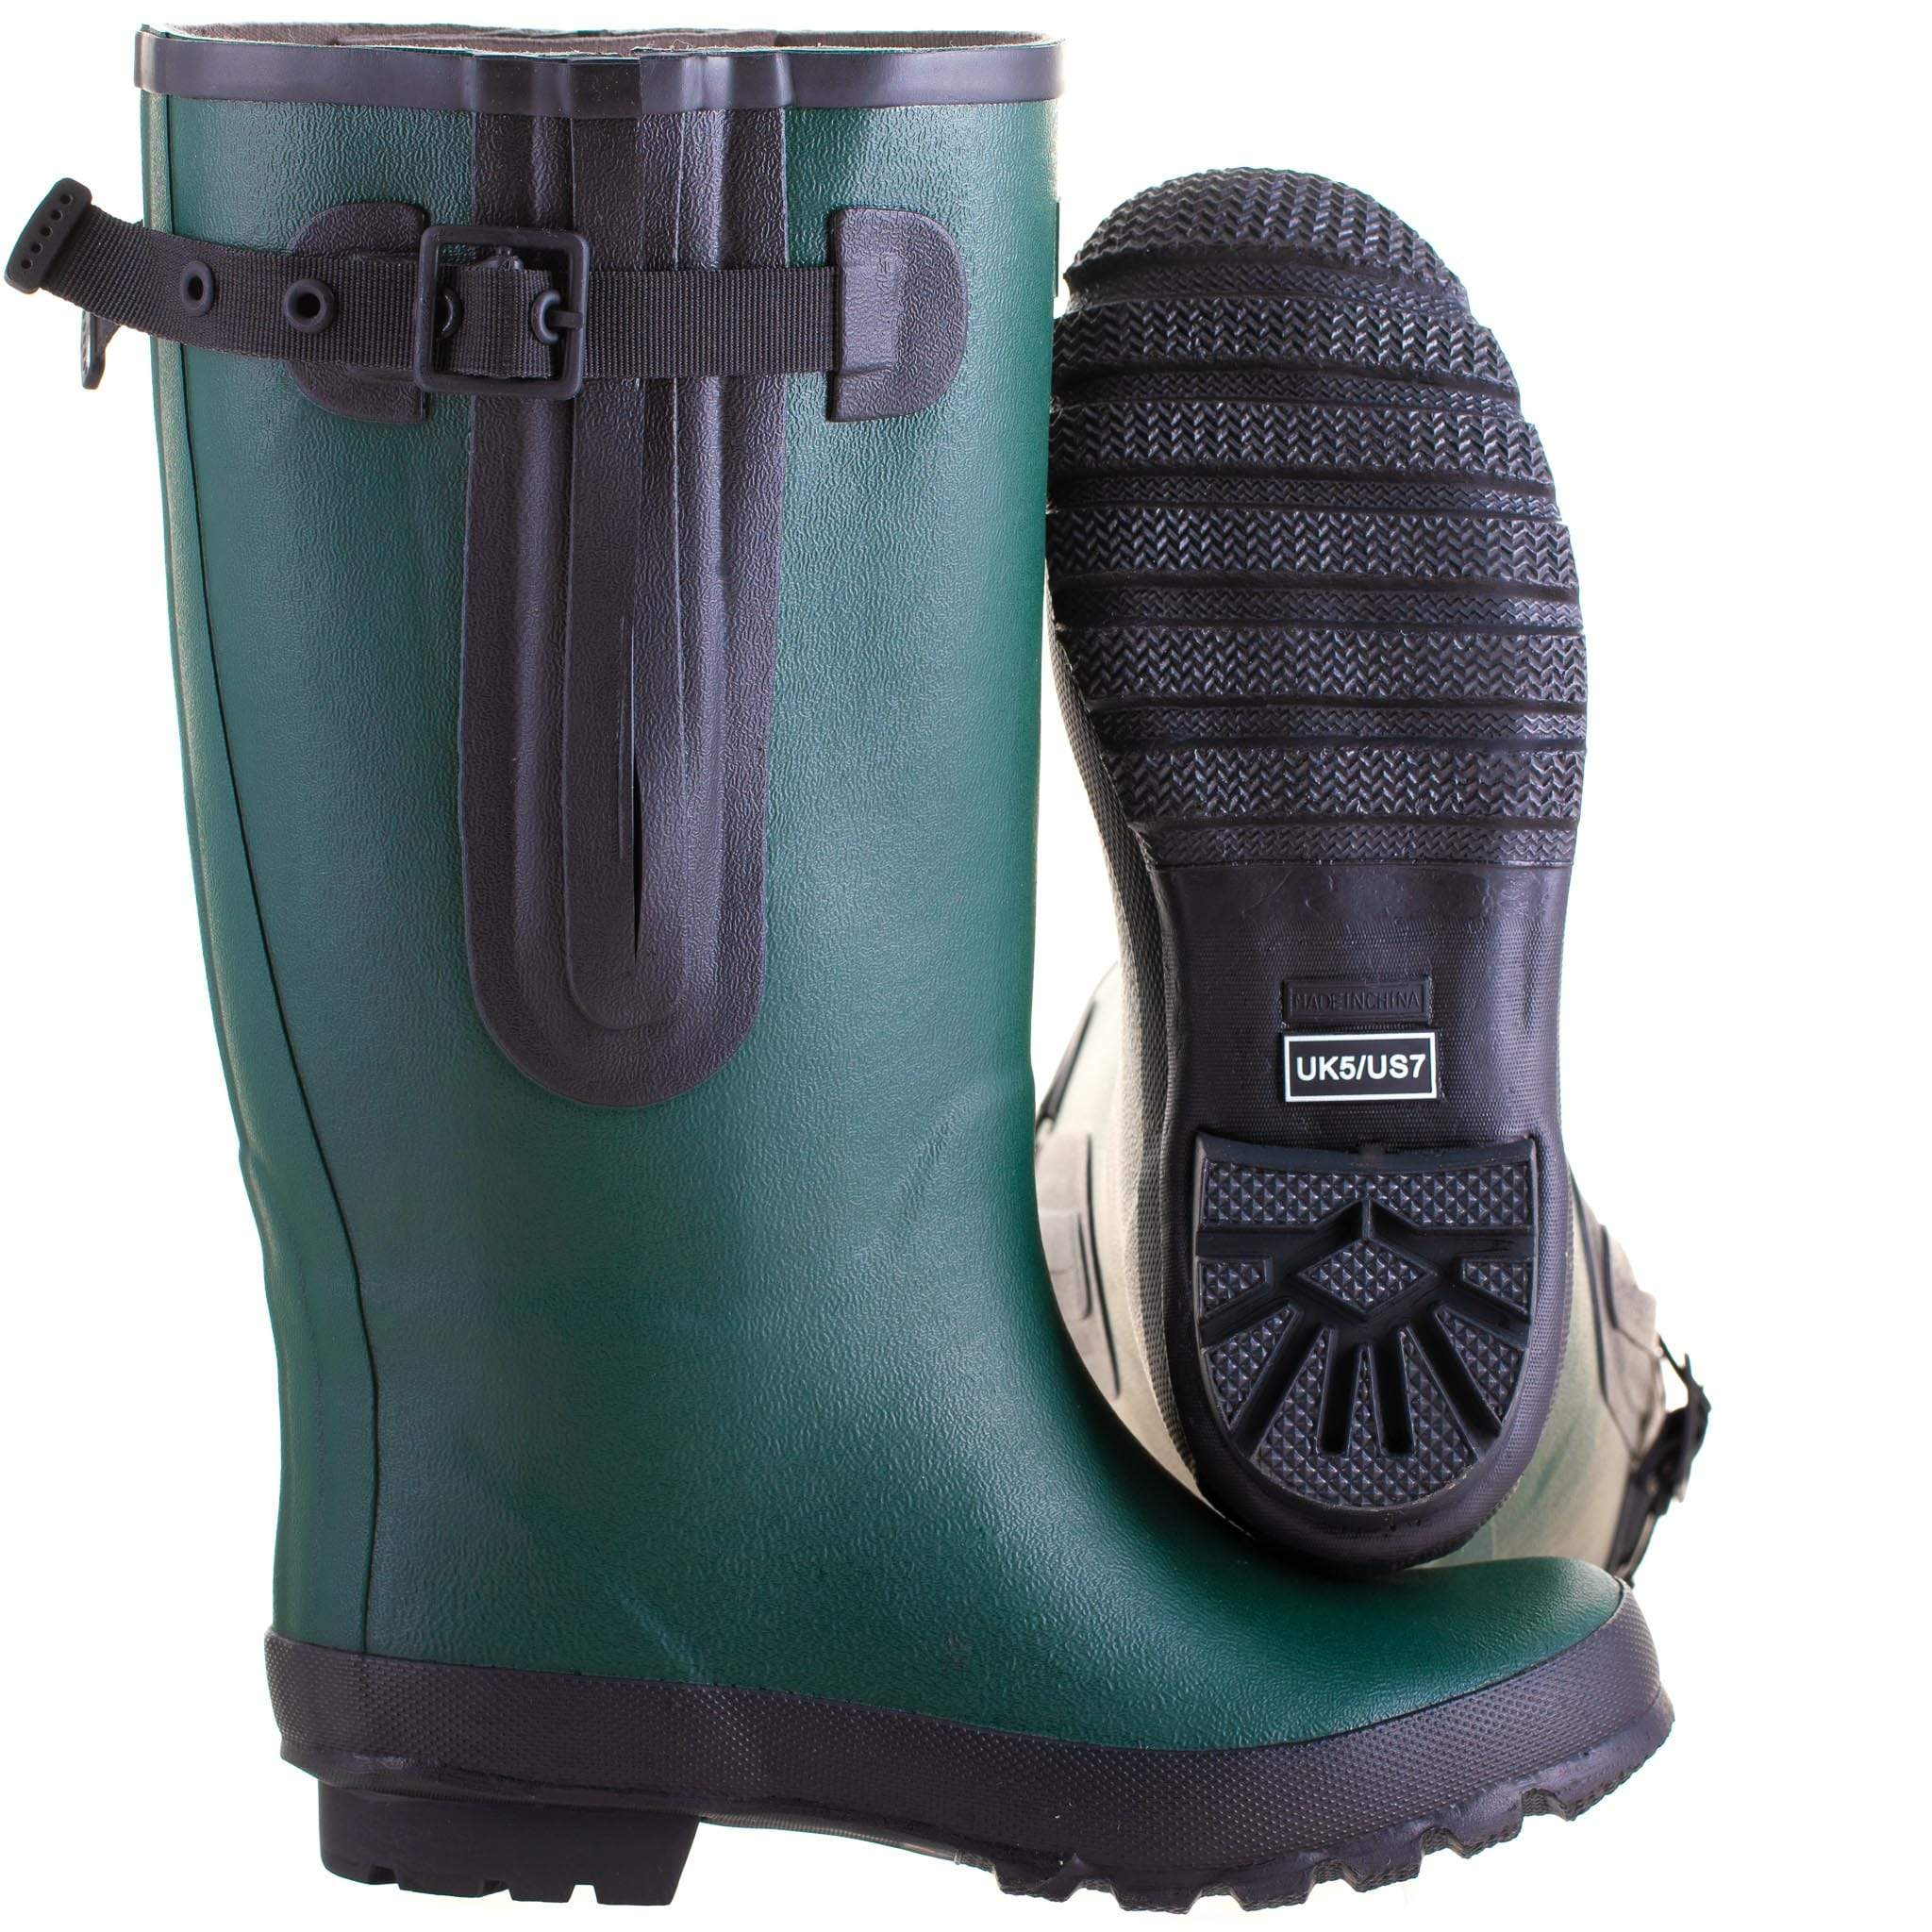 Extra Wide Calf Rain Boots - Green - Fit 23 inch Wide in Foot and Jileon RainBoots